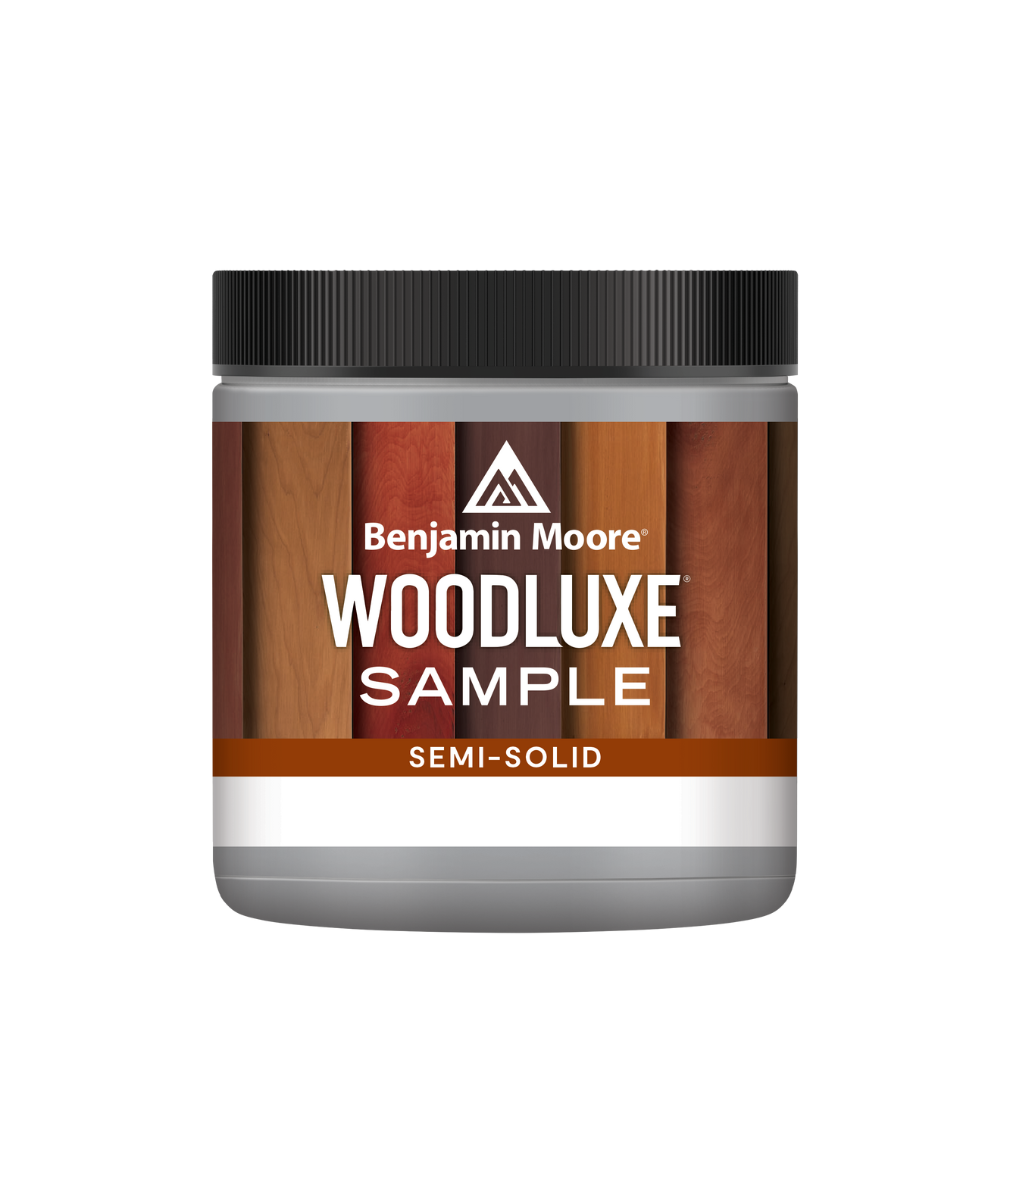 Benjamin Moore Woodluxe® Water-Based Semi-Solid Exterior Stain Half Pint Sample available to shop at Regal Paint Centers in Maryland, Virginia and DC.